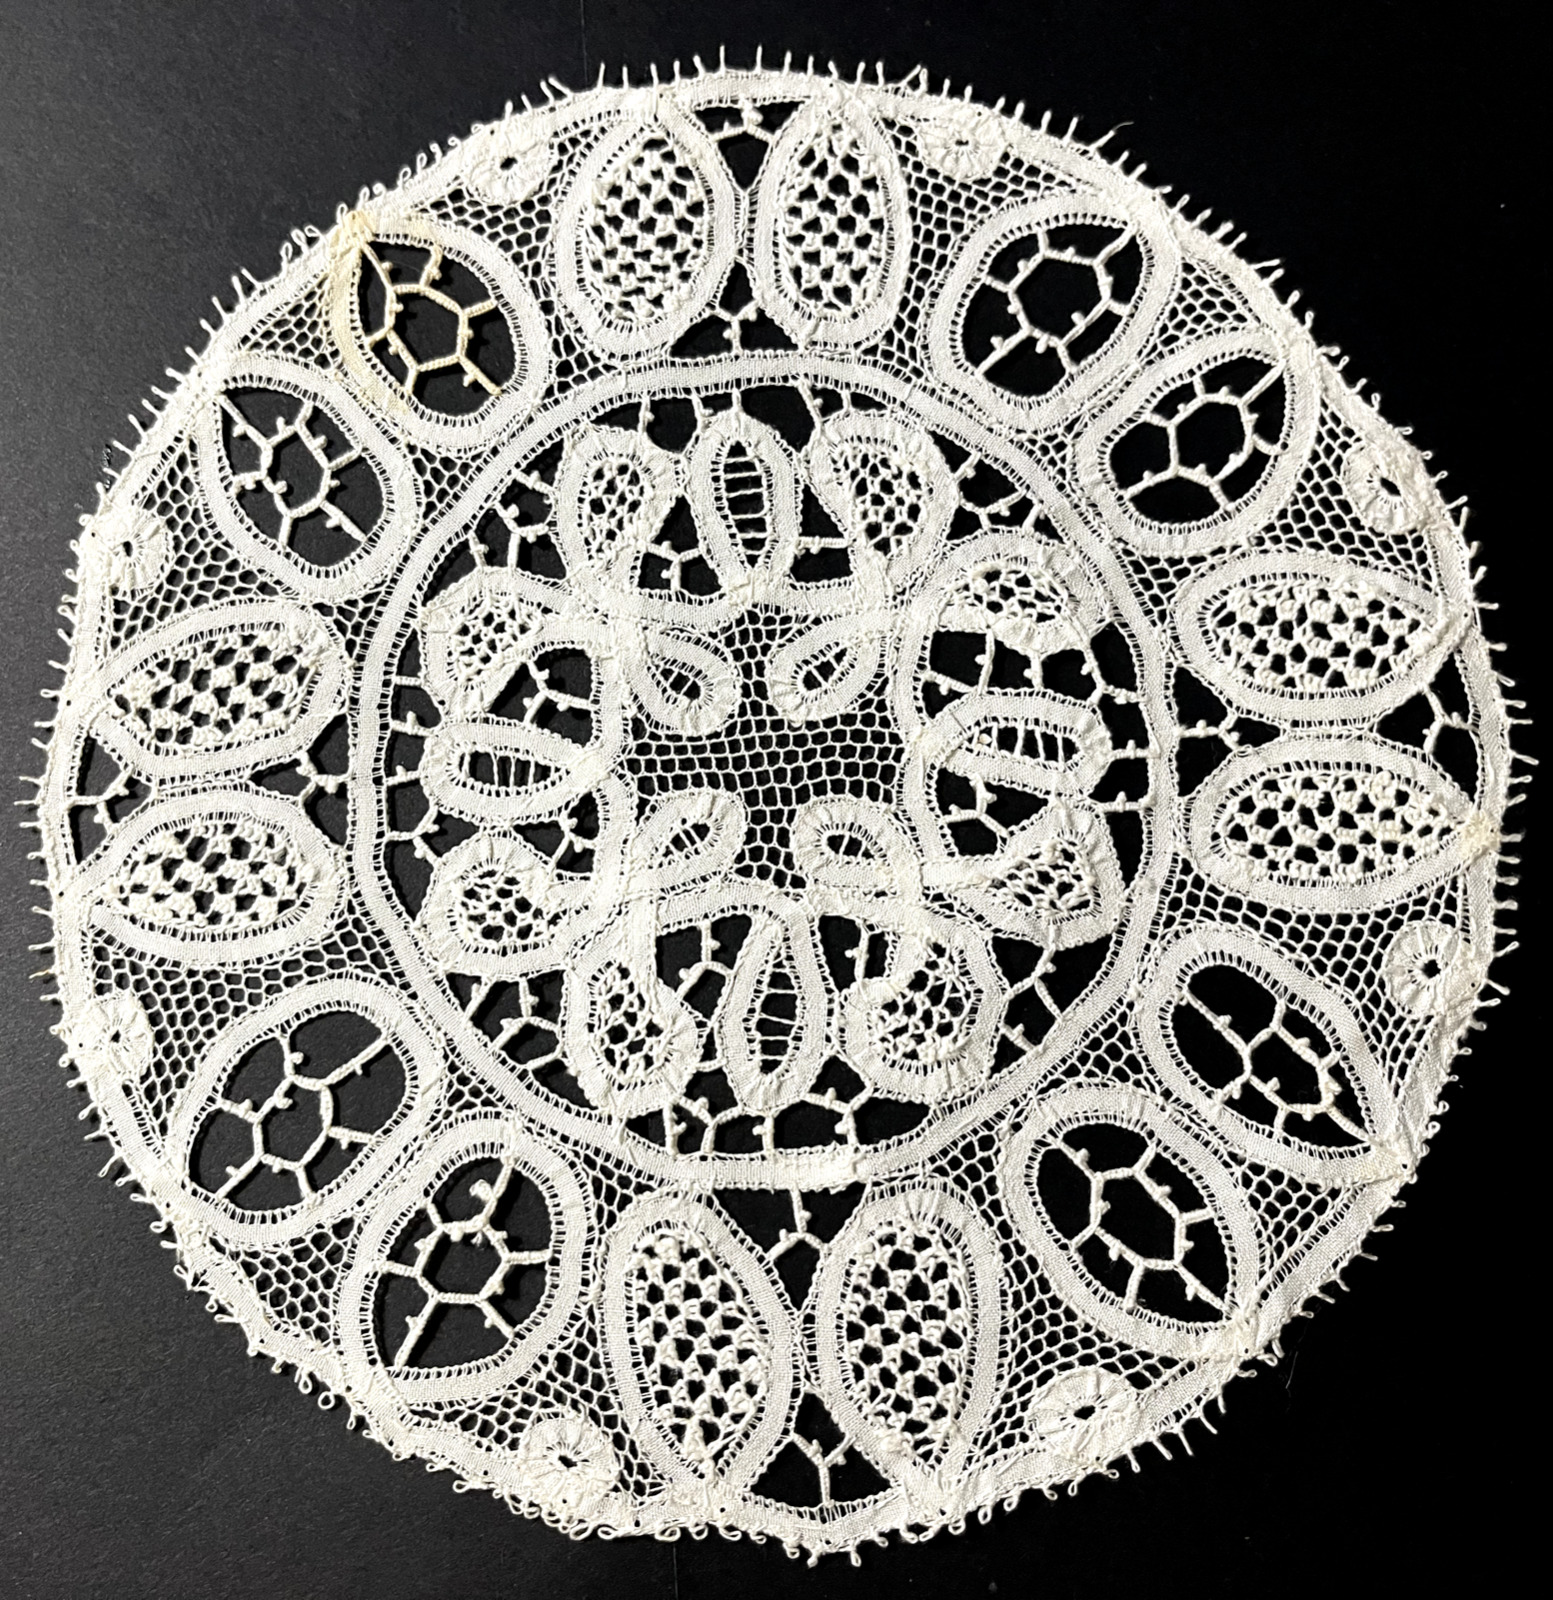 Gorgeous Vintage Doily The Tape Lace Beautiful  Ornamental Pattern 8 1/2